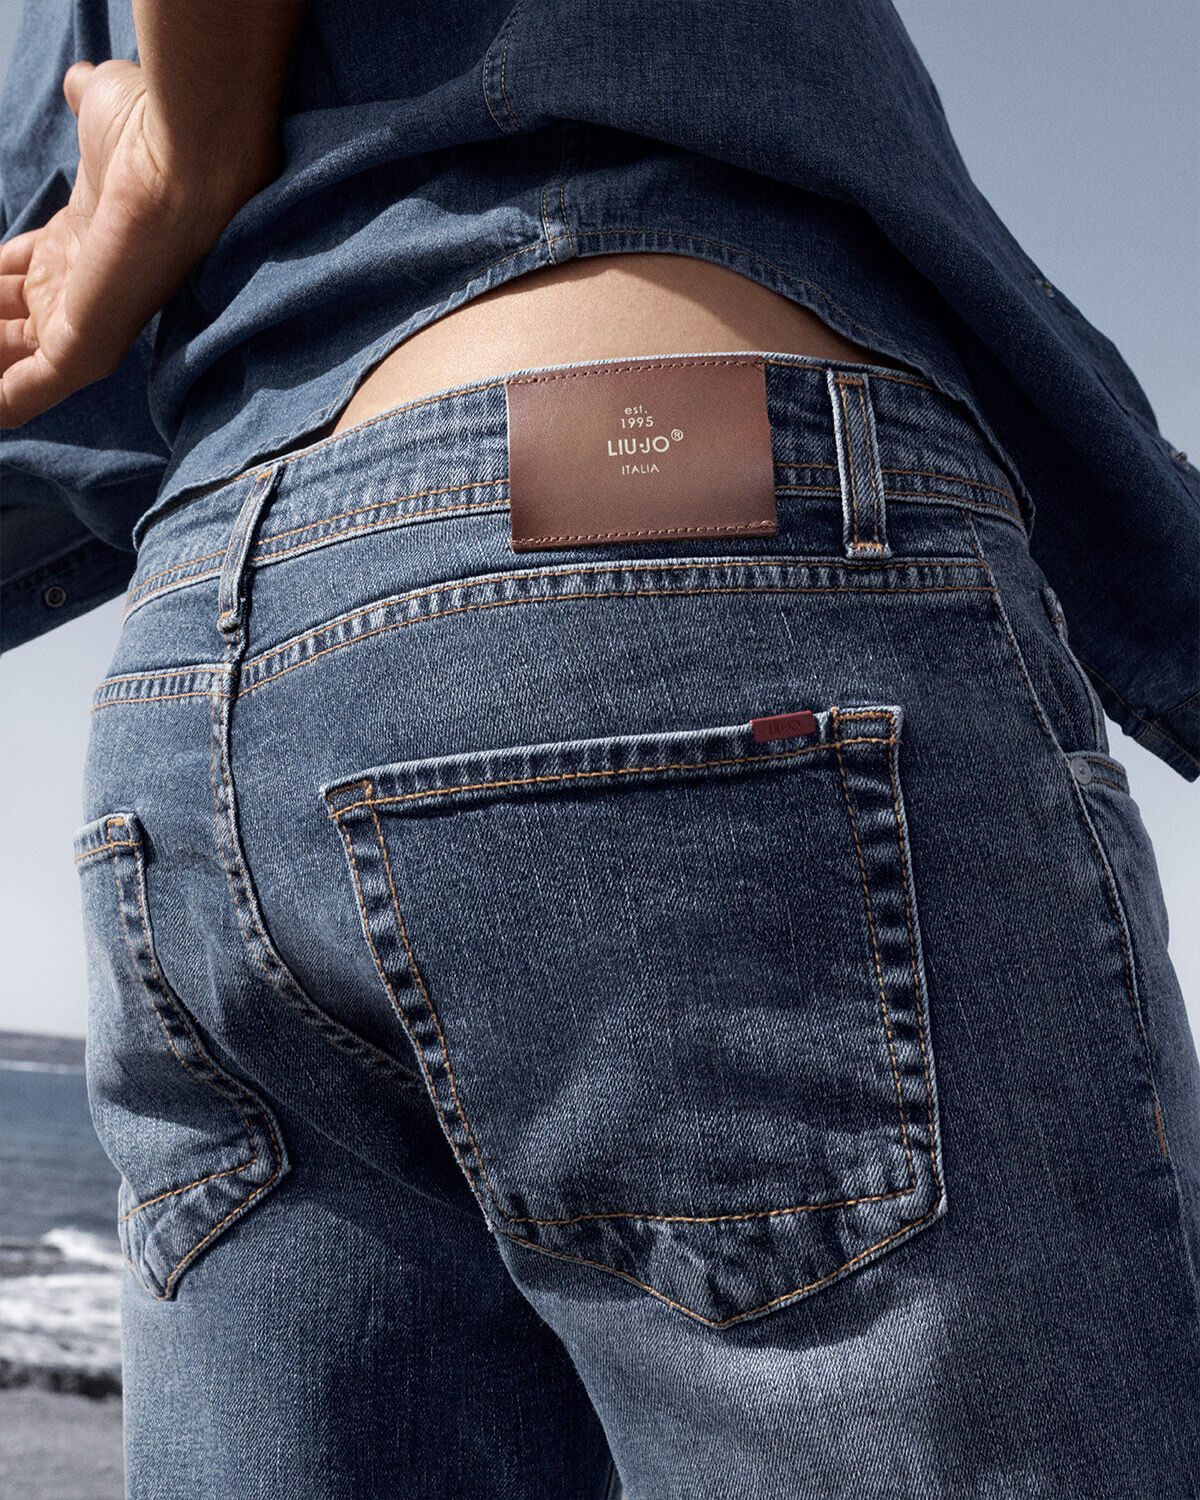 Go green, wear blue with Conscious Denim at H&M